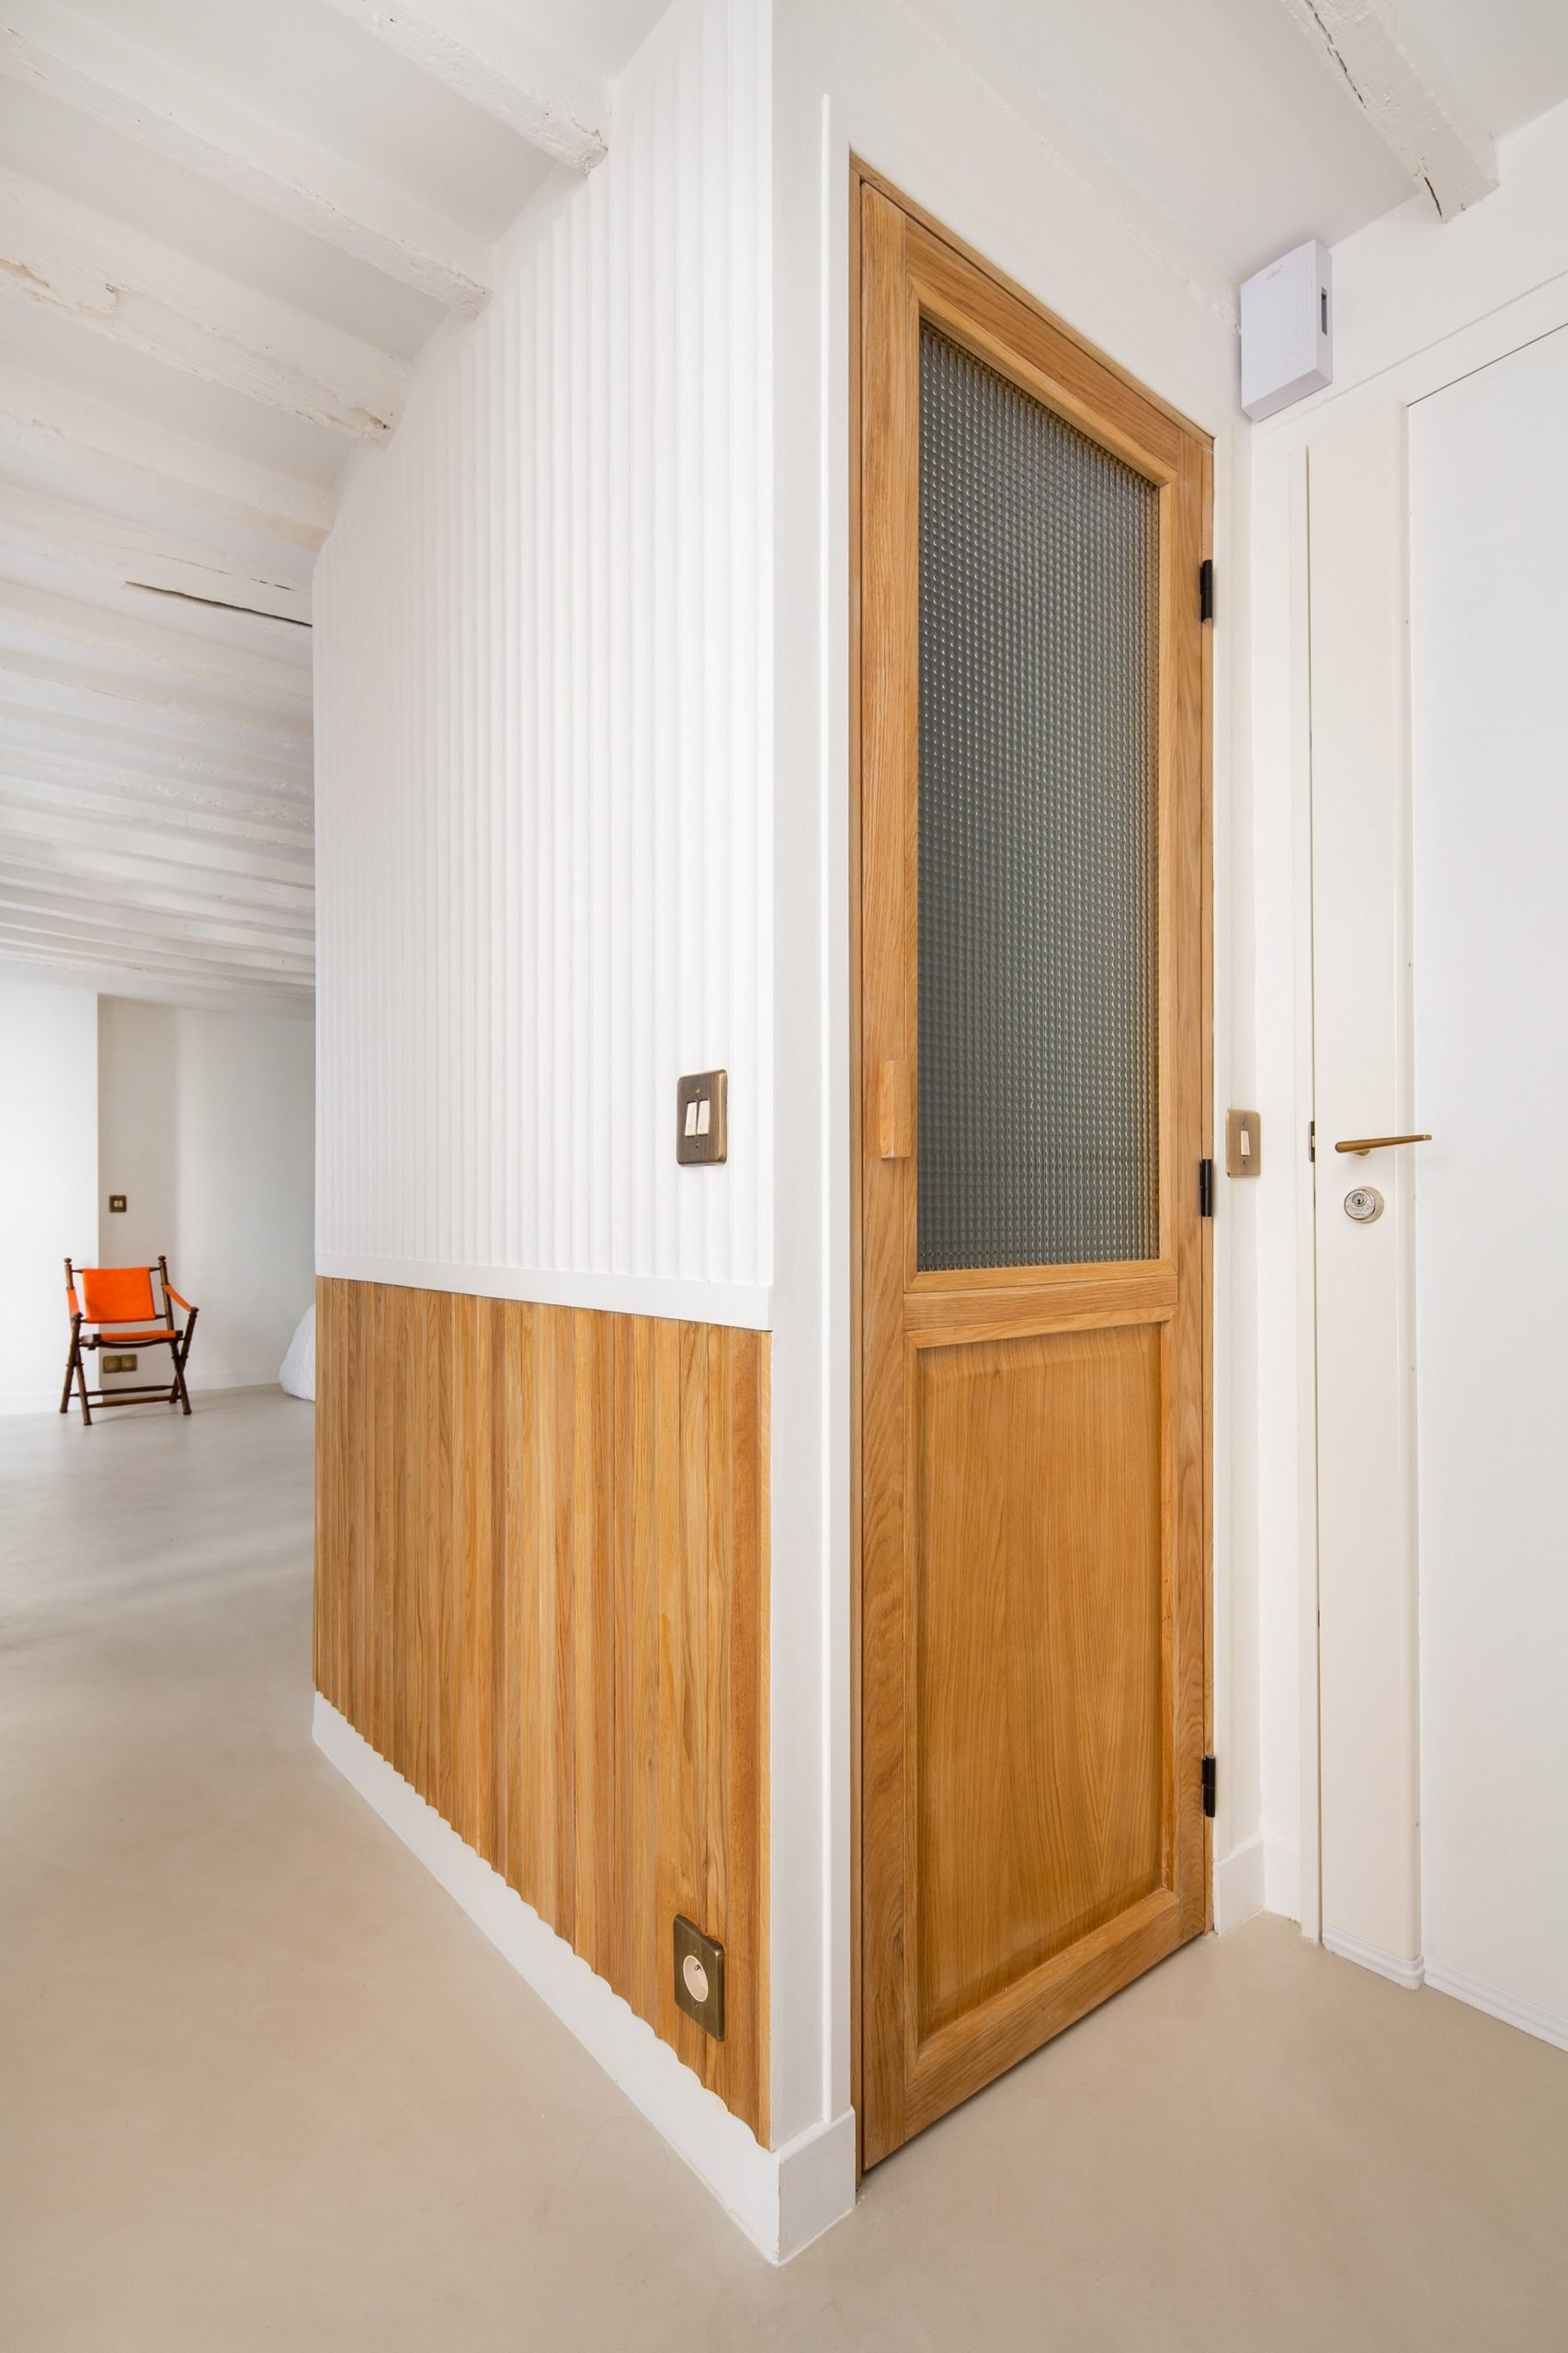 Doors have a stained wood and frosted glass construction 